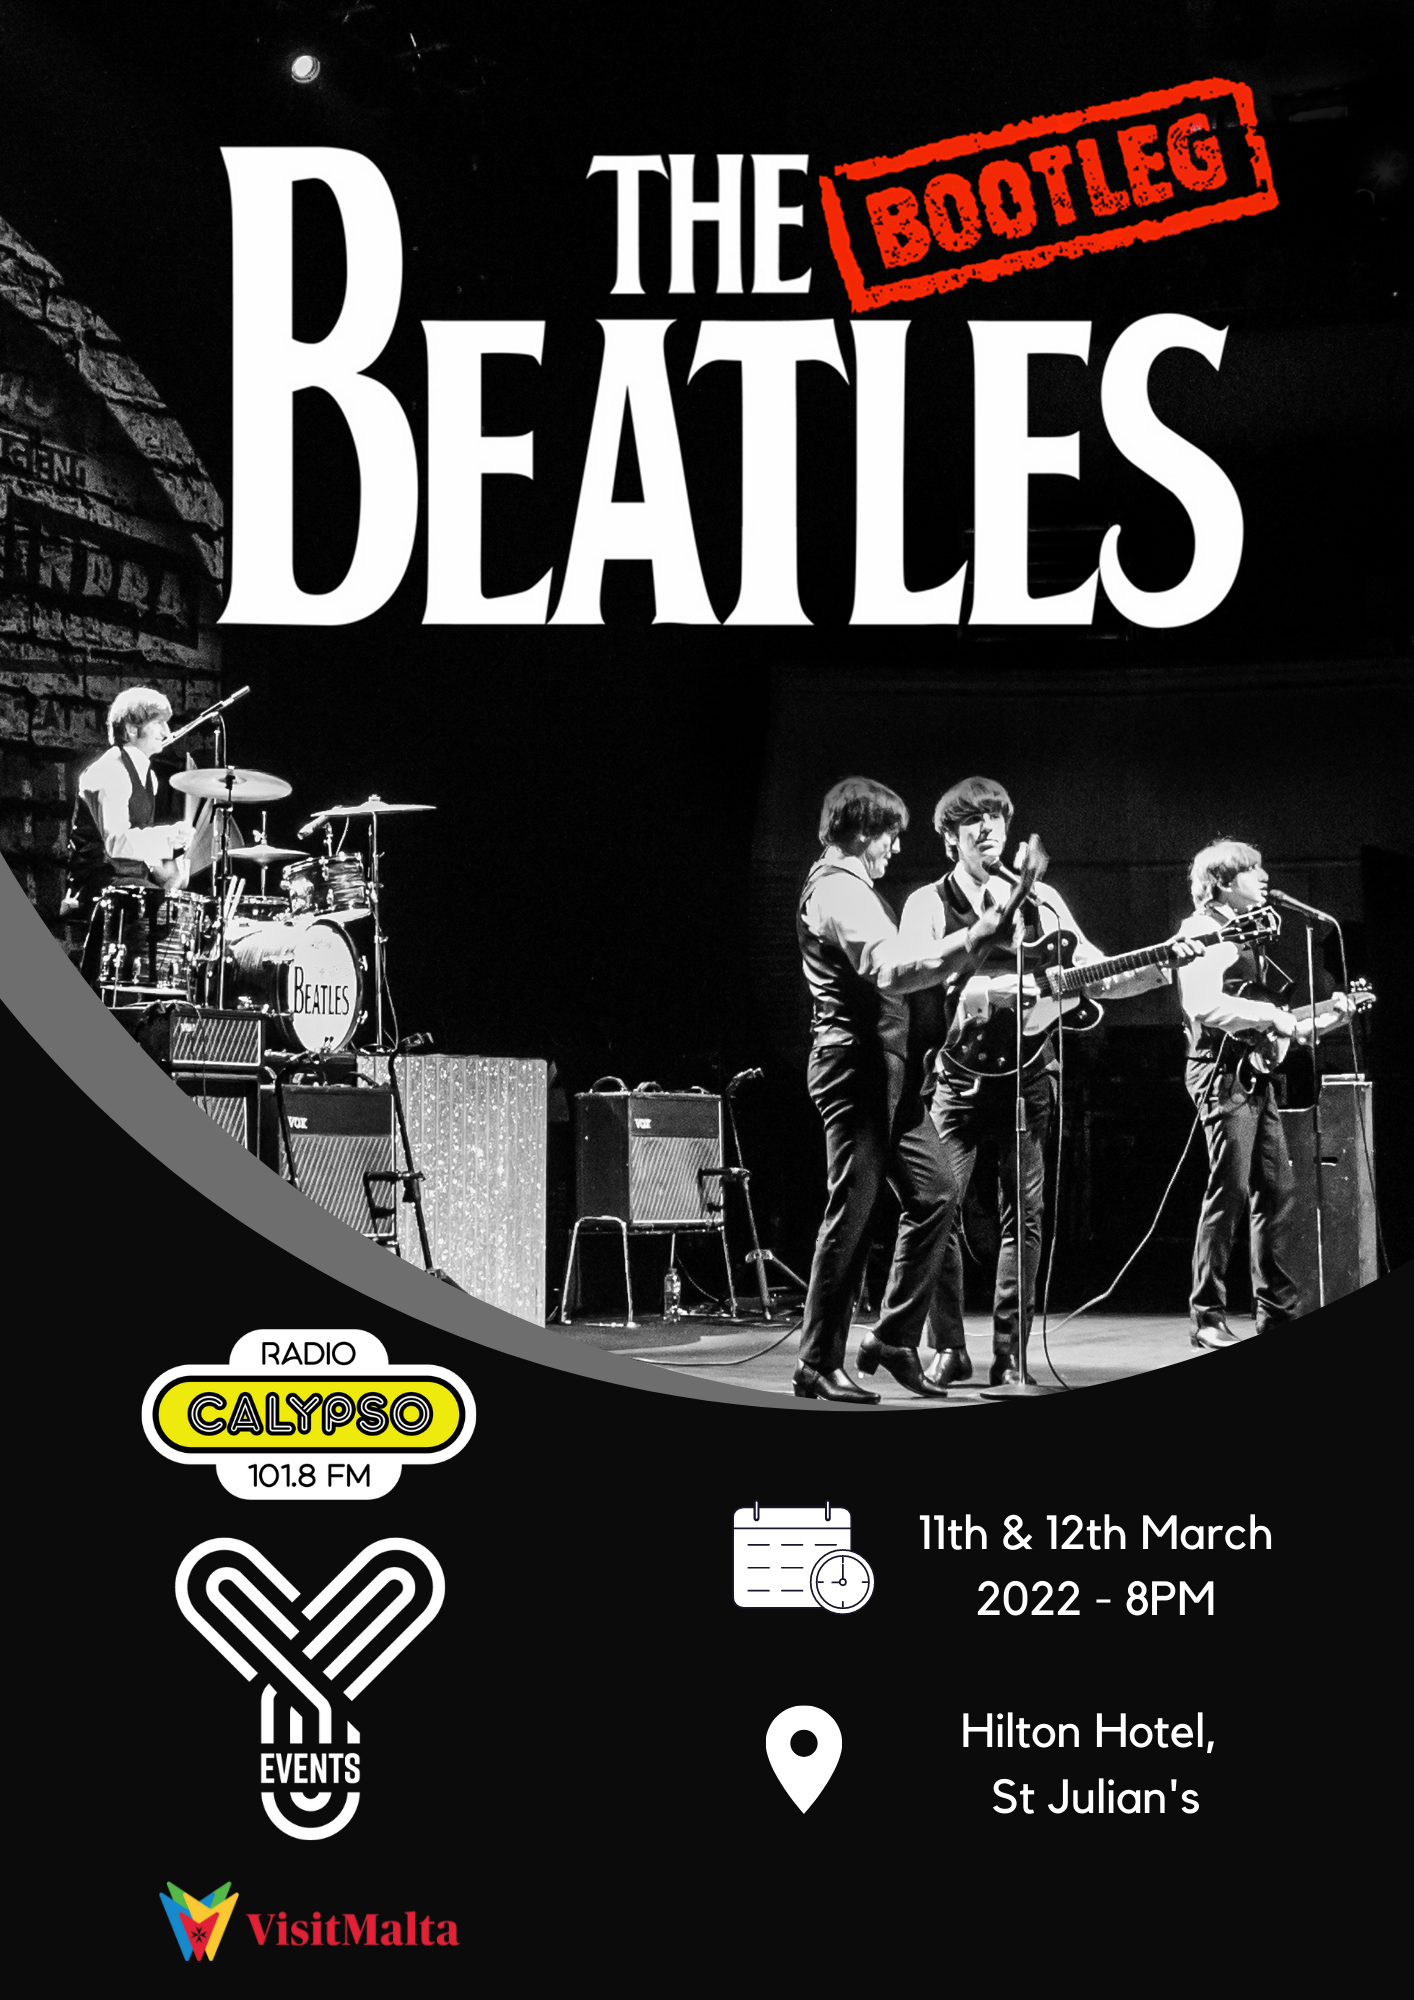 The Bootleg Beatles - The world’s best Beatles tribute band poster